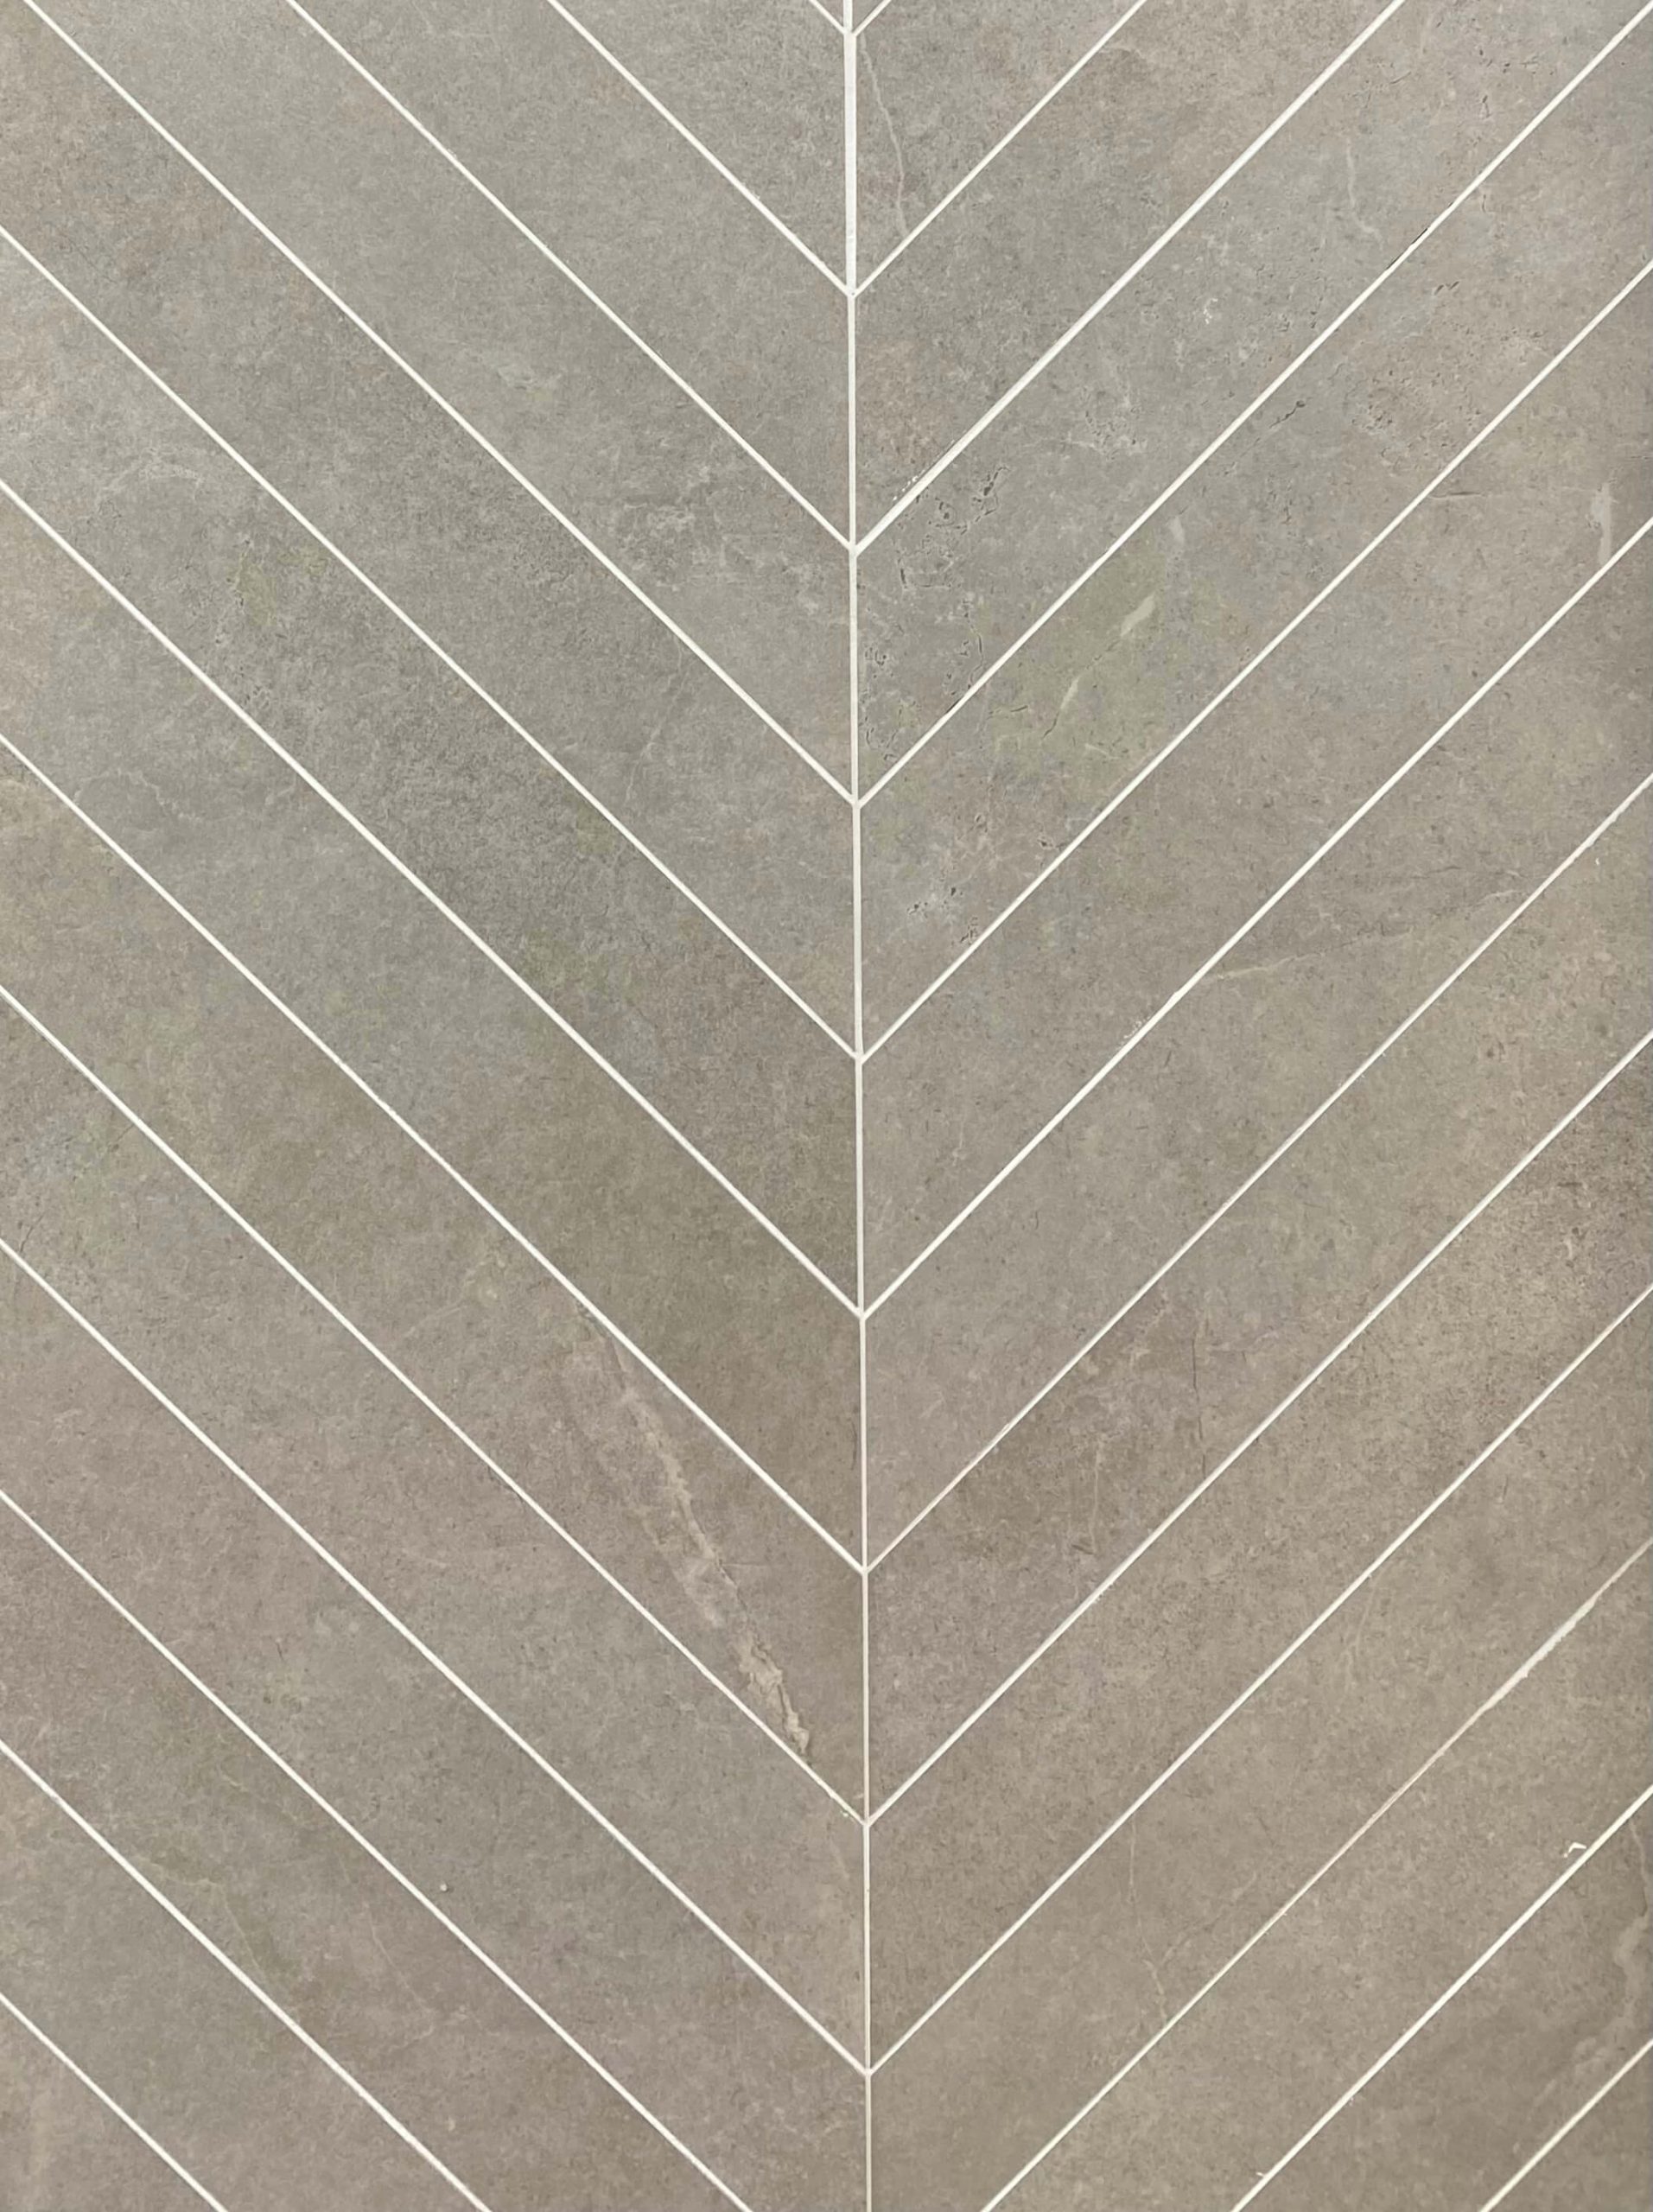 Yosemite Grey Chevron Stone Look In/out Rectified Porcelain Tile 4268